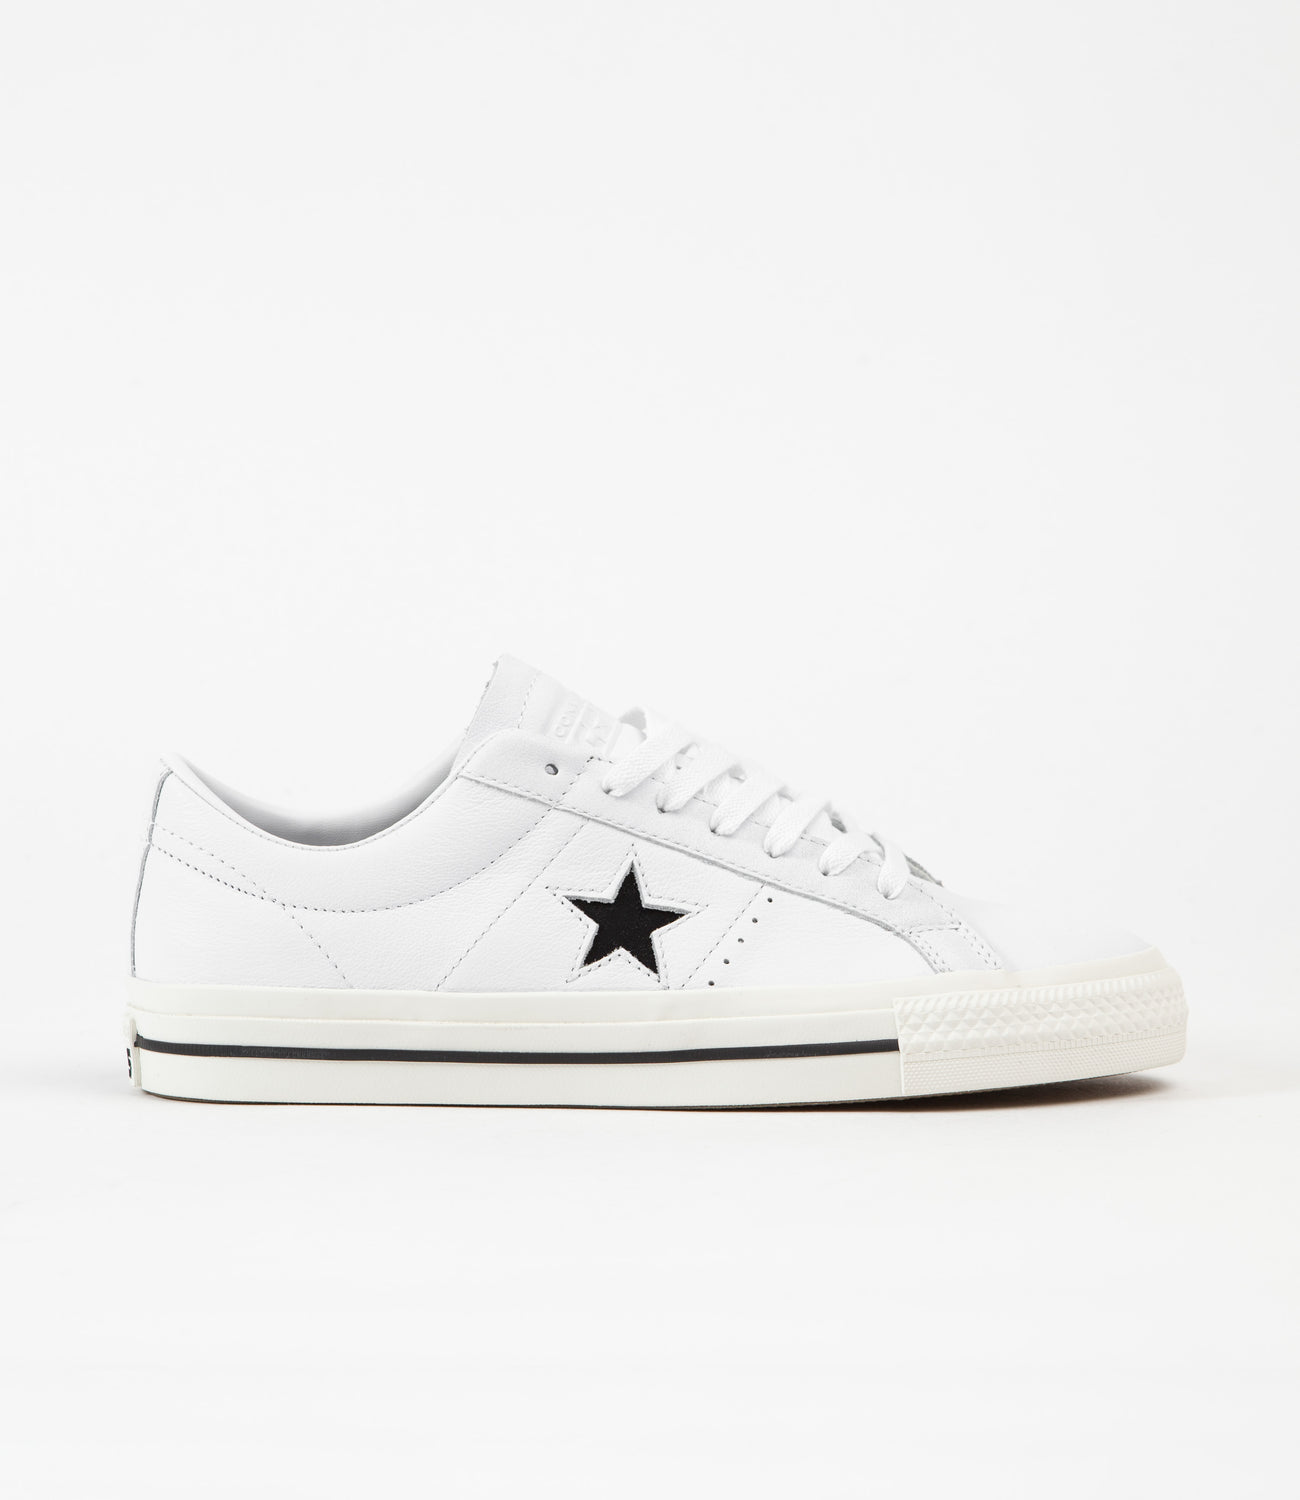 Dominant kwaad stopcontact Converse One Star Pro Ox Leather Shoes - White / Black / Egret | Flatspot